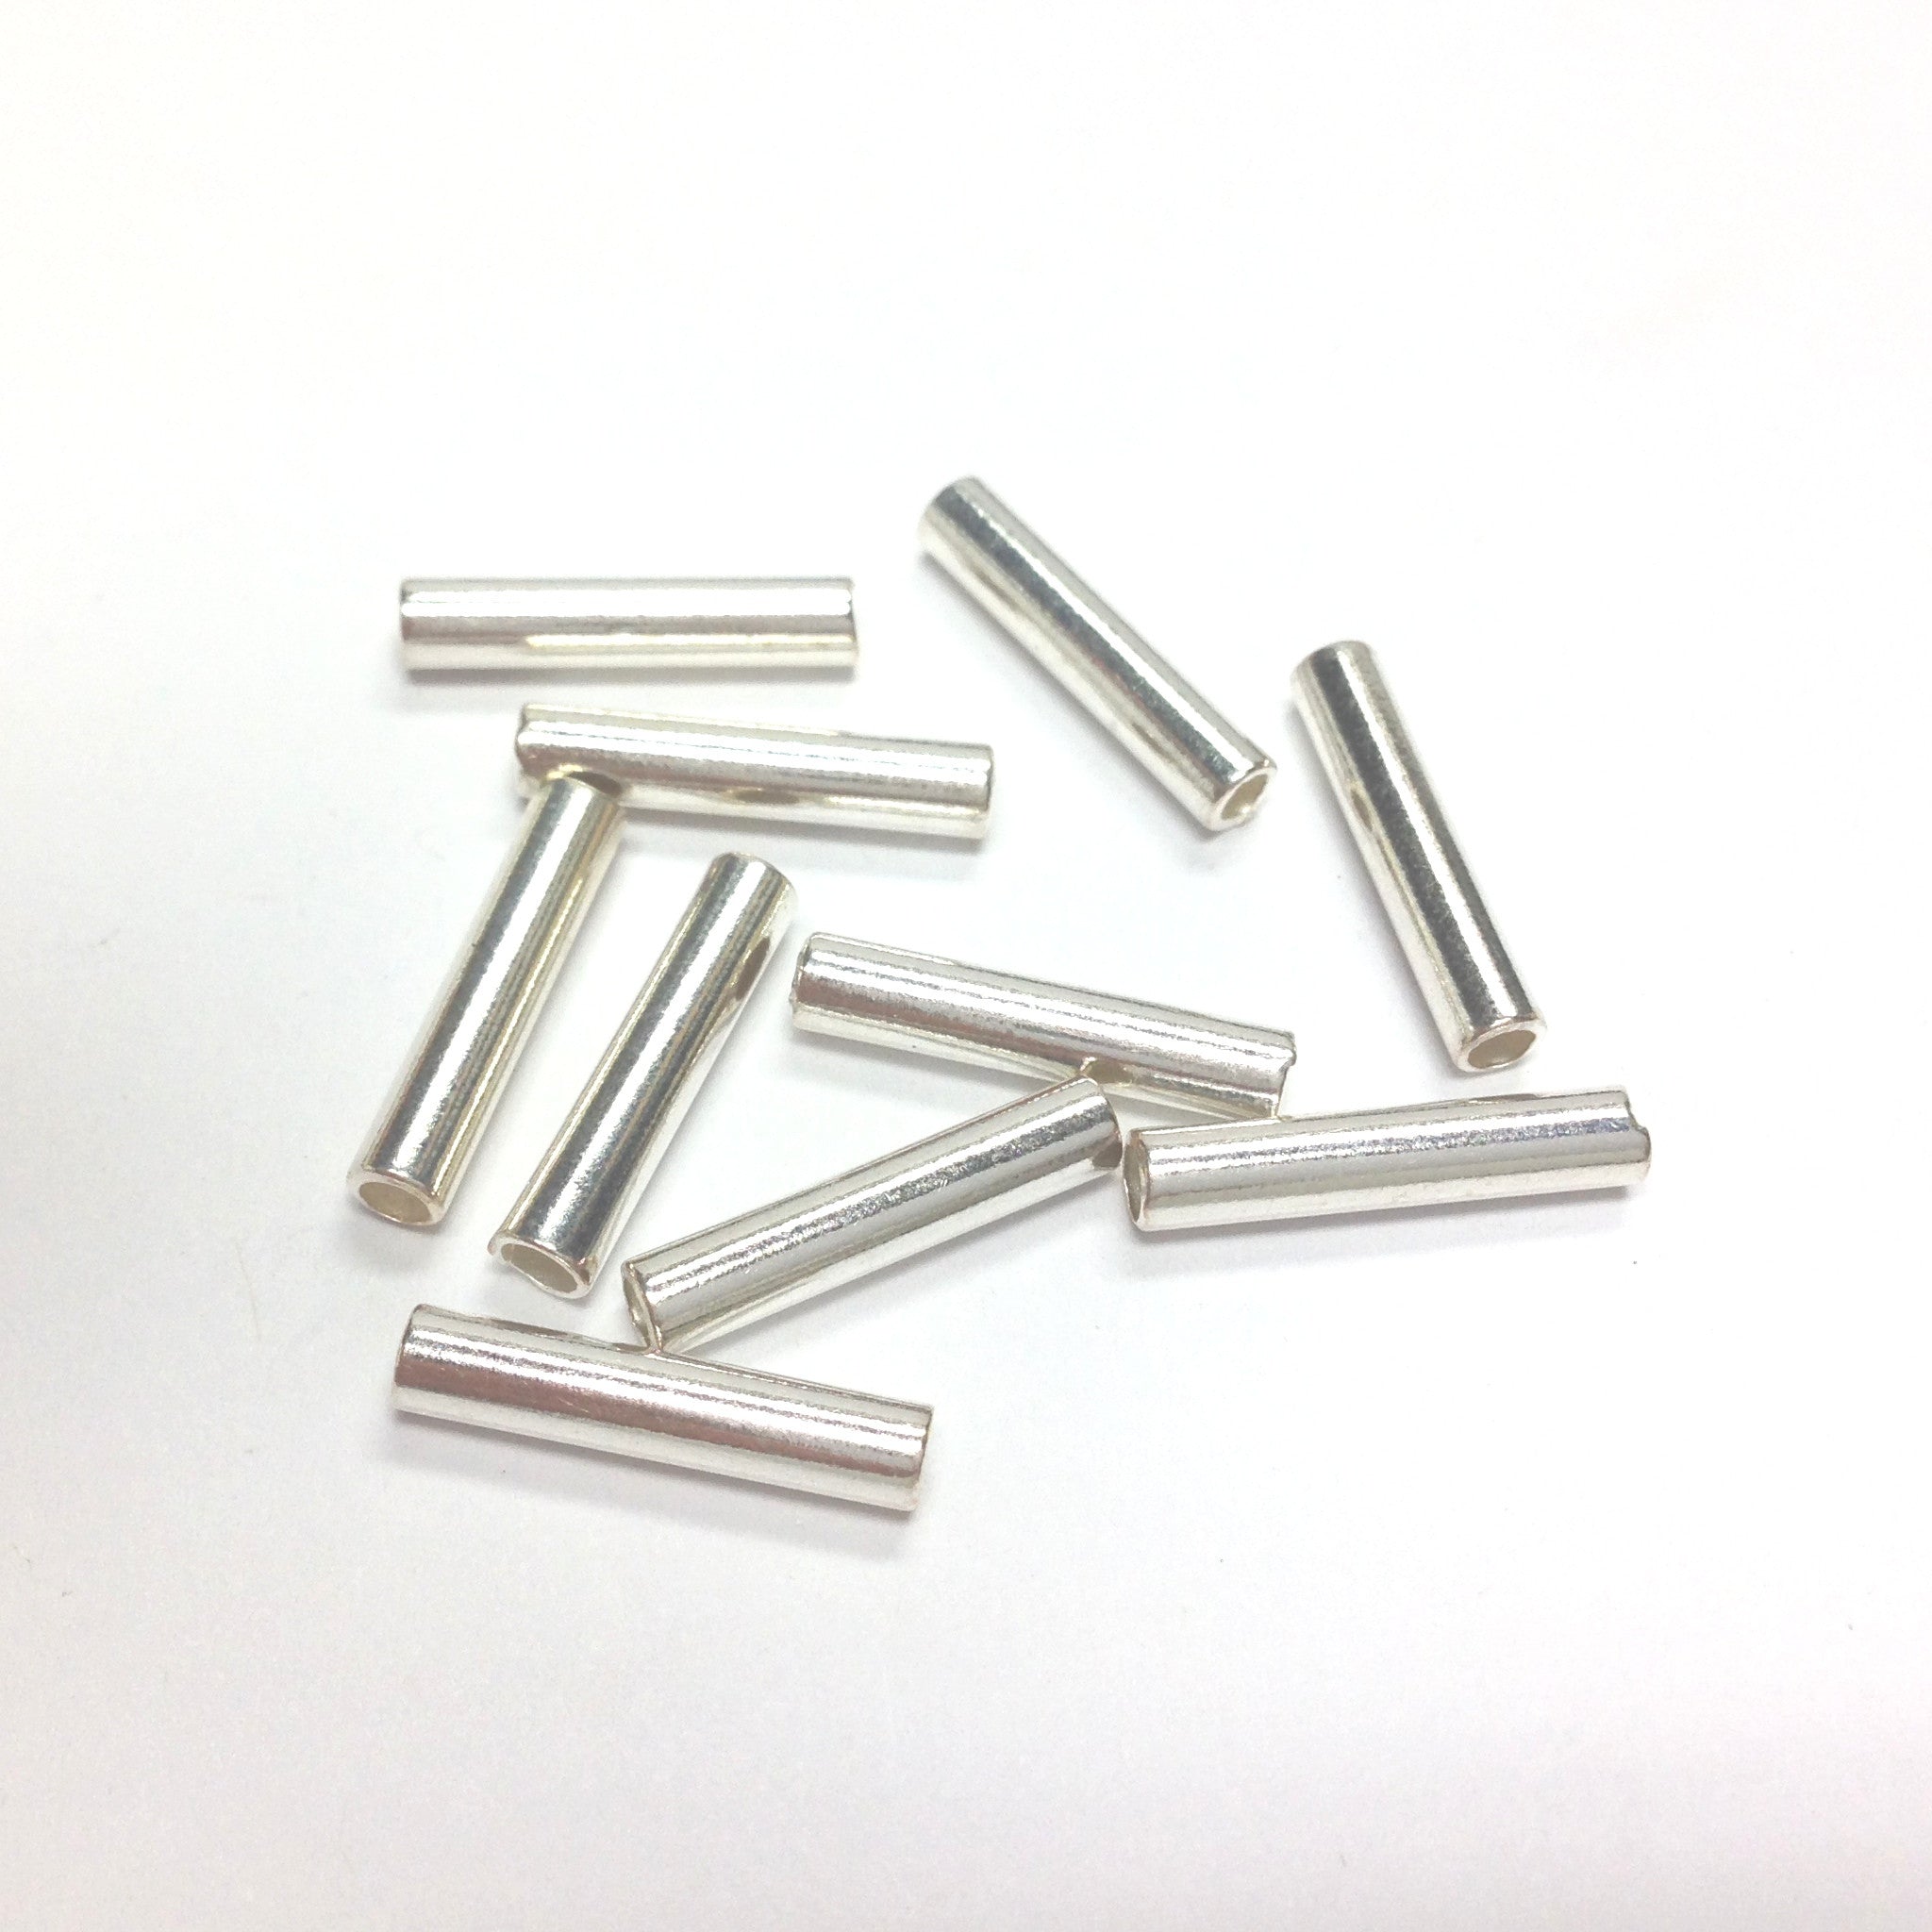 #15 Nickel Plated Steel Ball Chain connectors